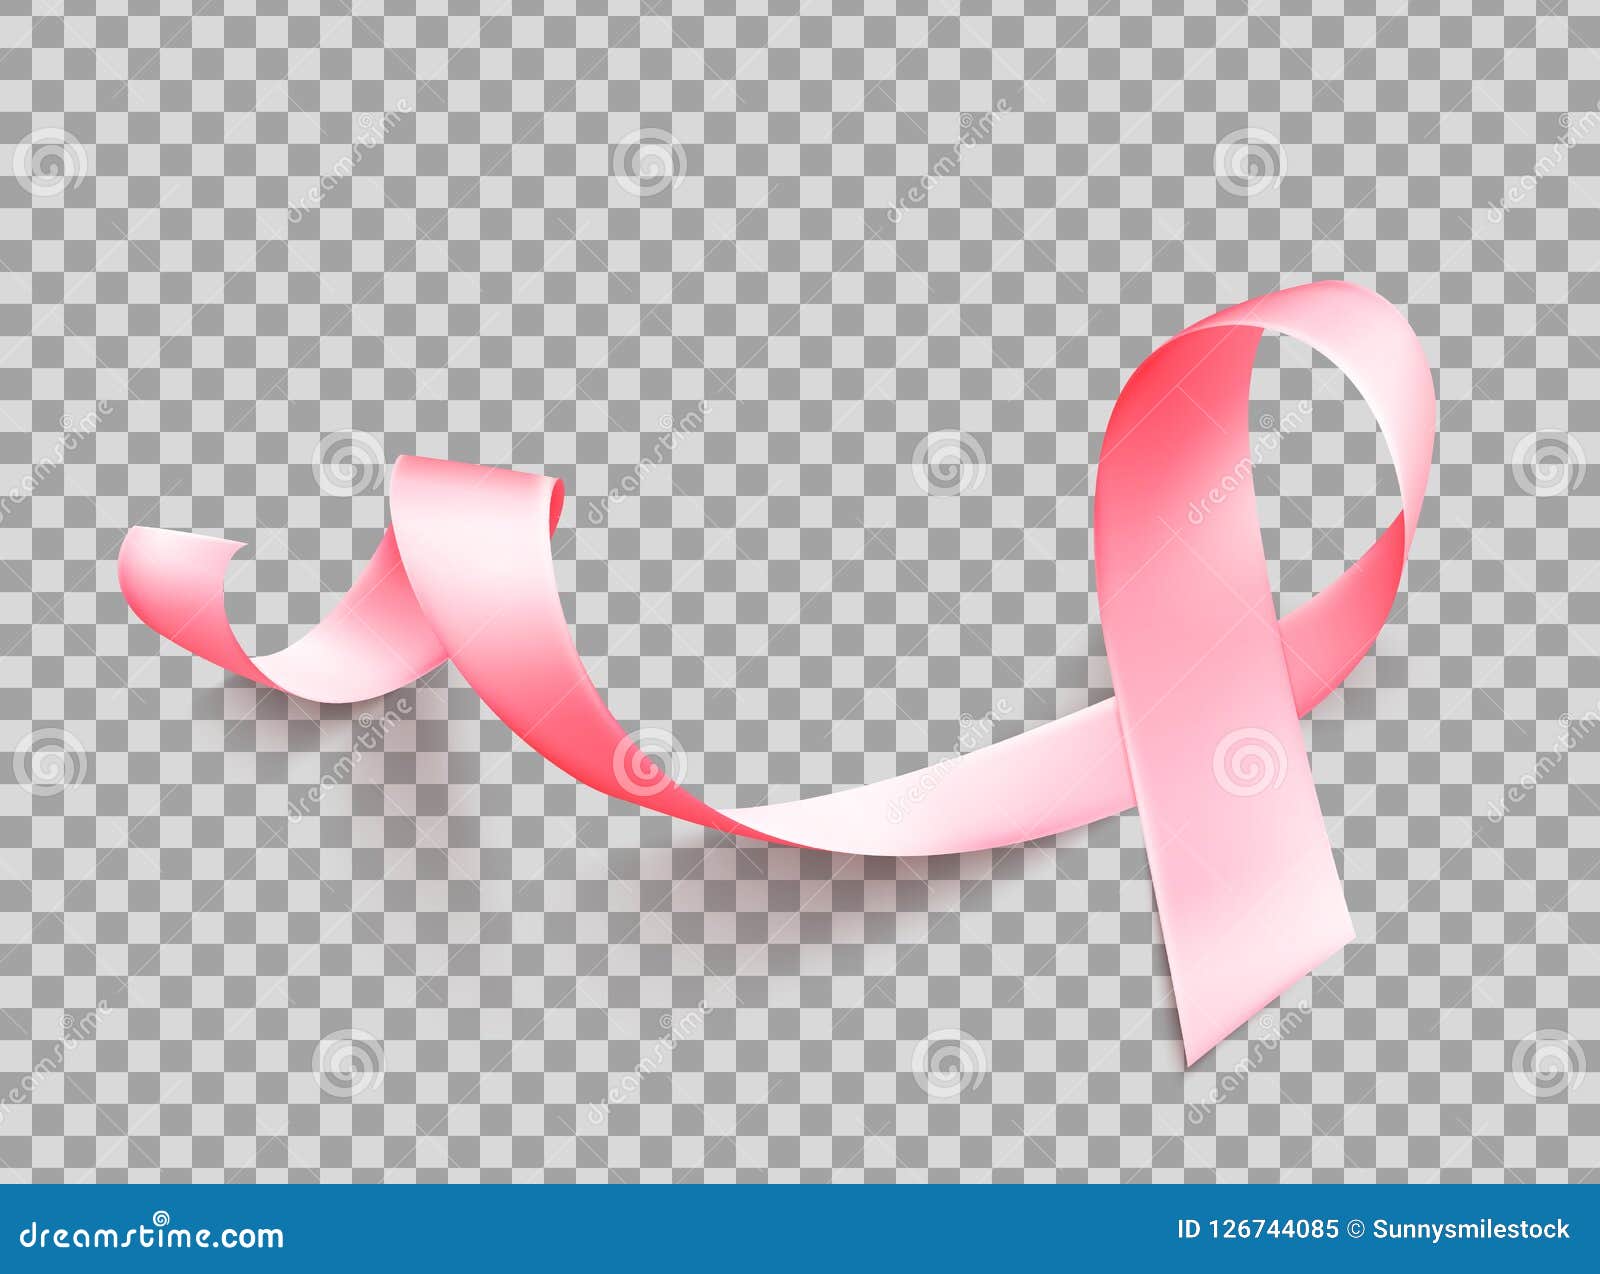 Realistic Pink Ribbon Isolated Over White Background Symbol Of